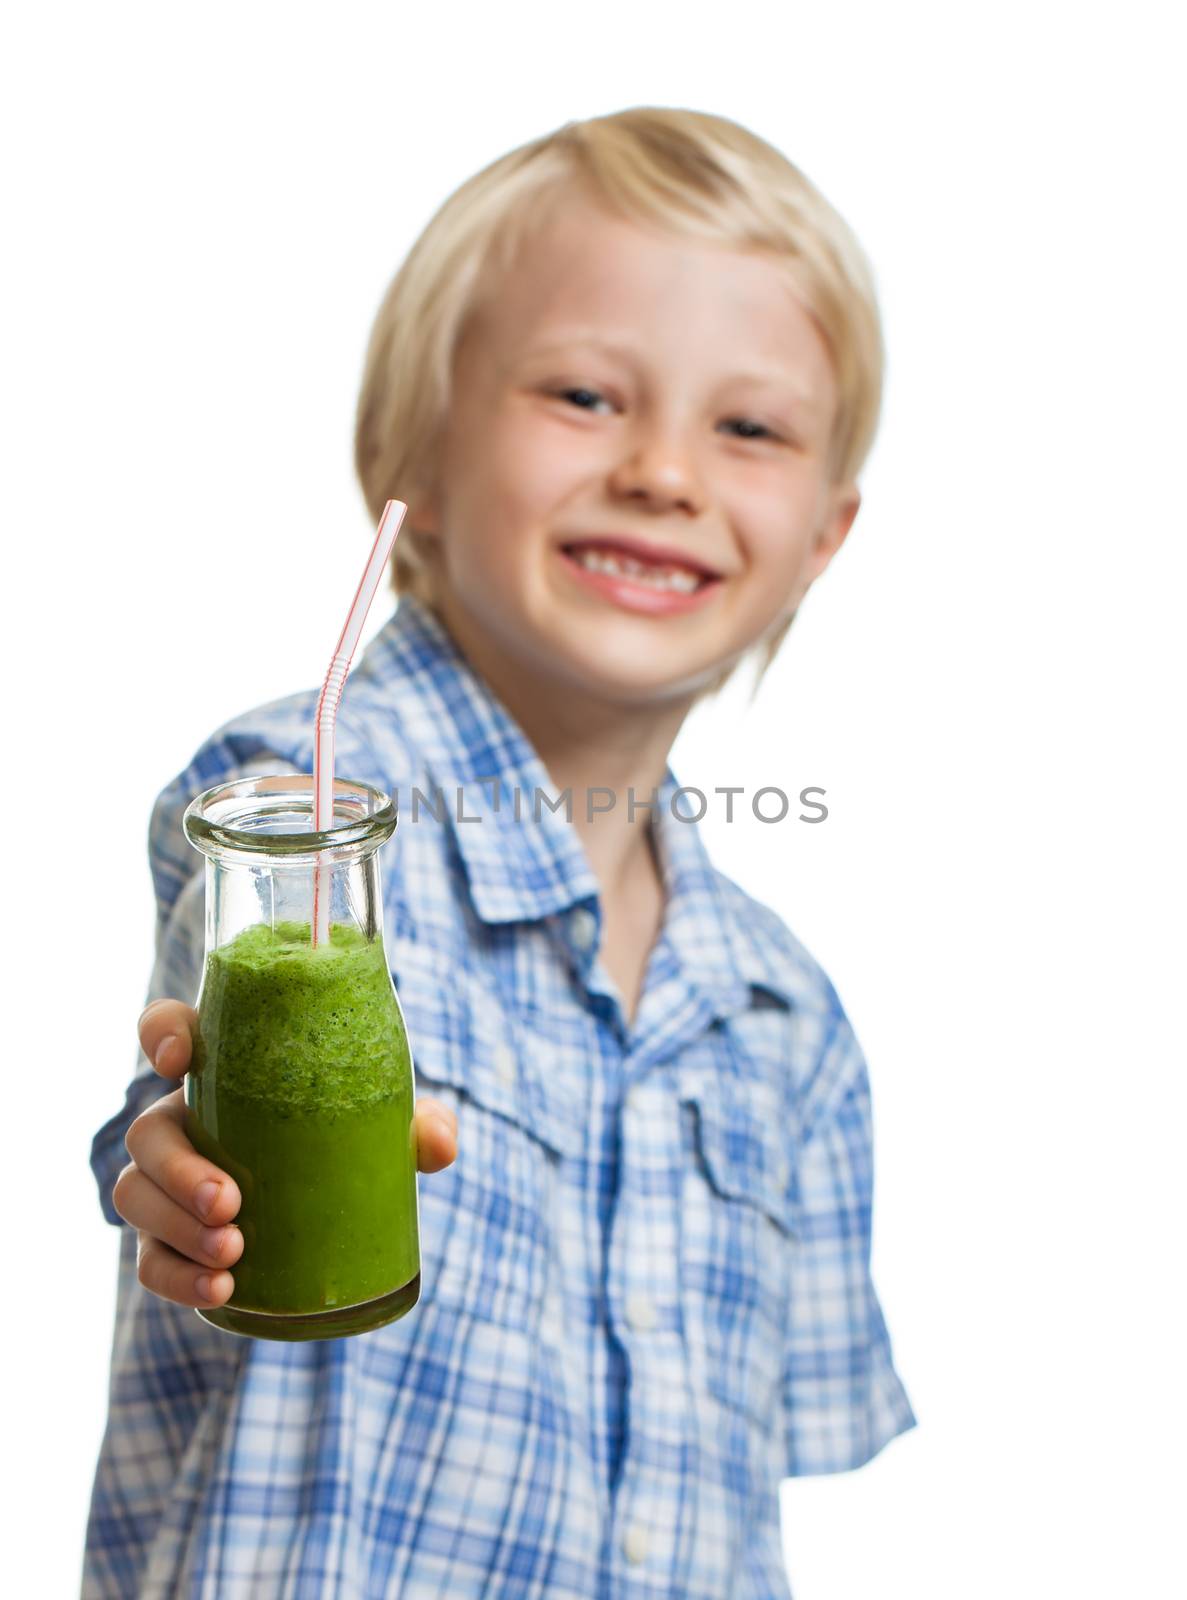 A cute healthy young boy holding a green smoothie or juice smiling. Focus on smoothie.  Isolated on white.